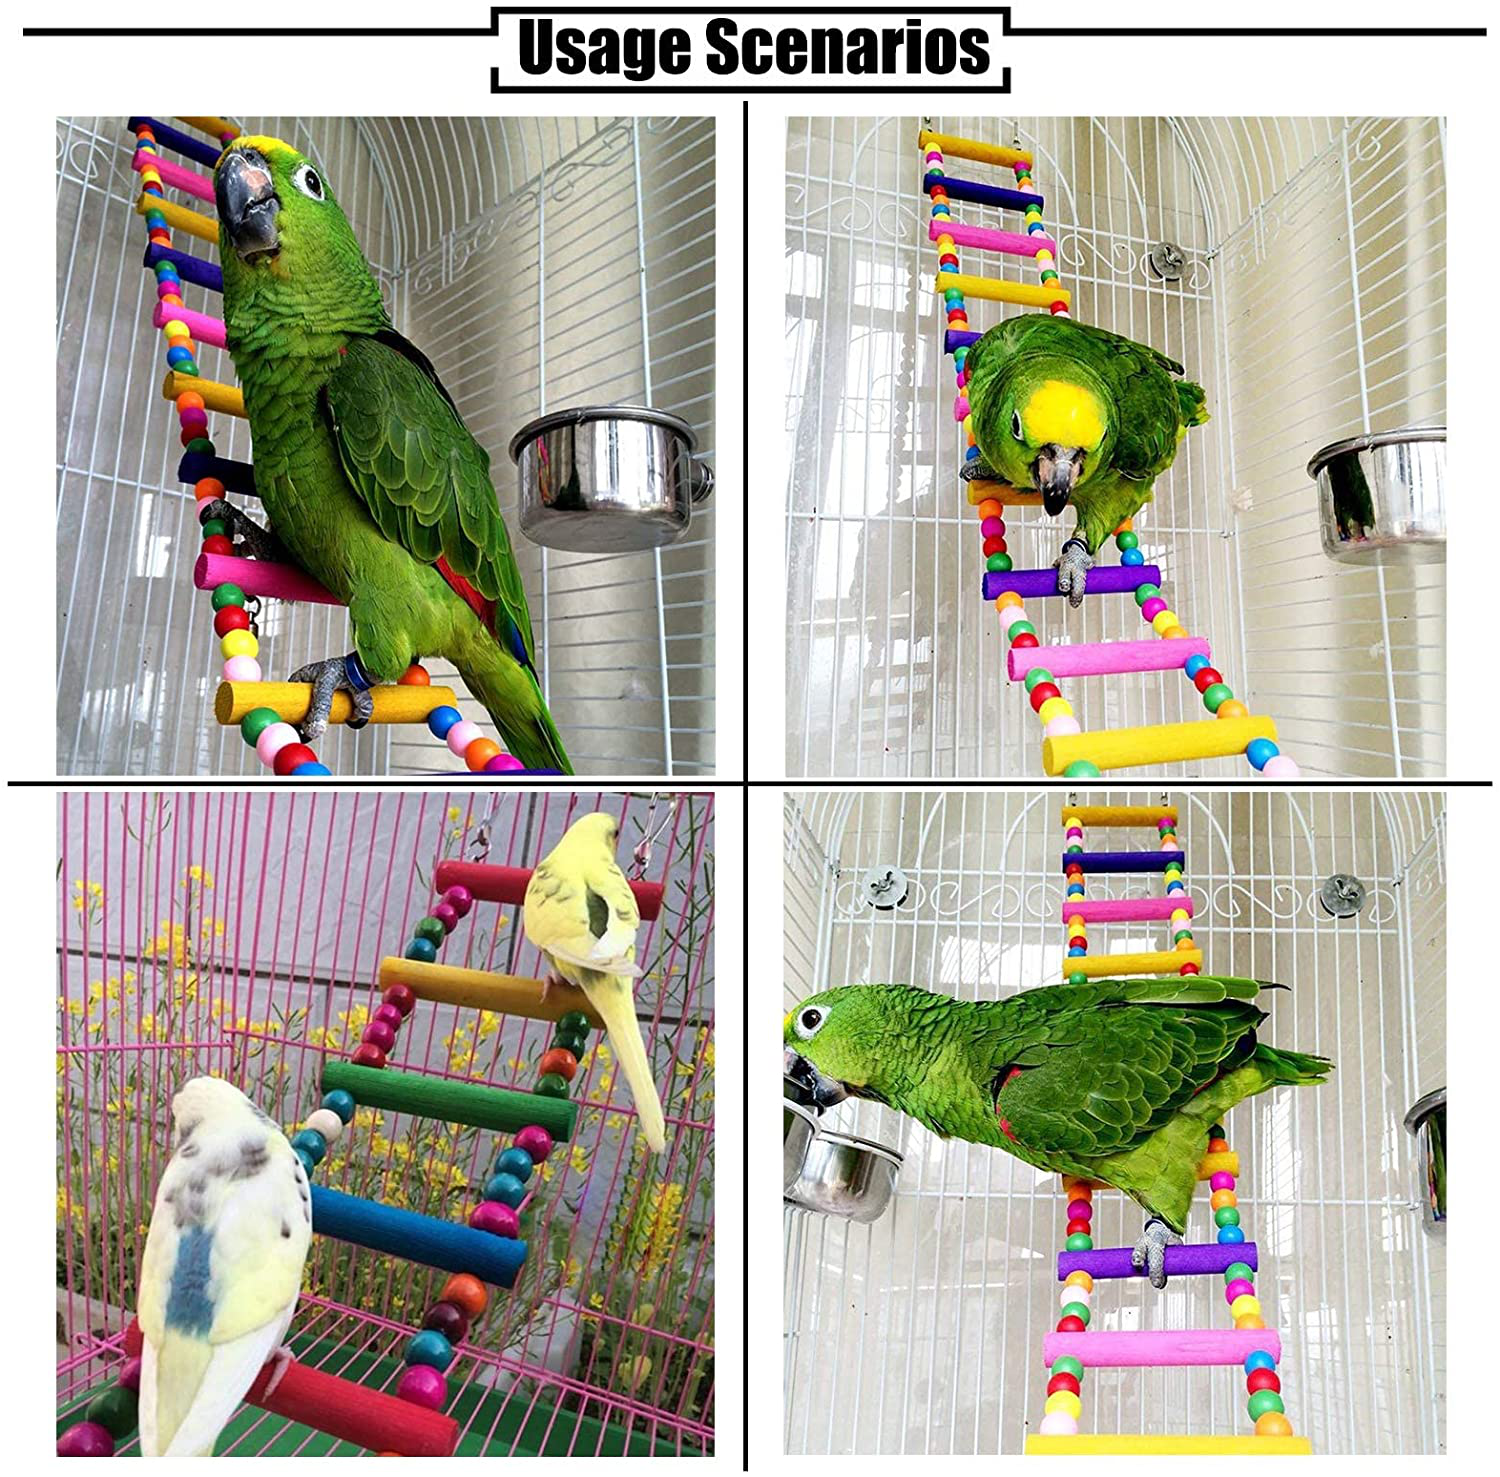 PINVNBY Bird Parrot Swing Chewing Toys Hanging Hammock Bell Pet Birds Cage Toys Wooden Perch with Wood Beads for Small Parakeets, Parrots, Conures, Love Birds, Cockatiels, Macaws, Finches Animals & Pet Supplies > Pet Supplies > Bird Supplies > Bird Ladders & Perches PINVNBY   